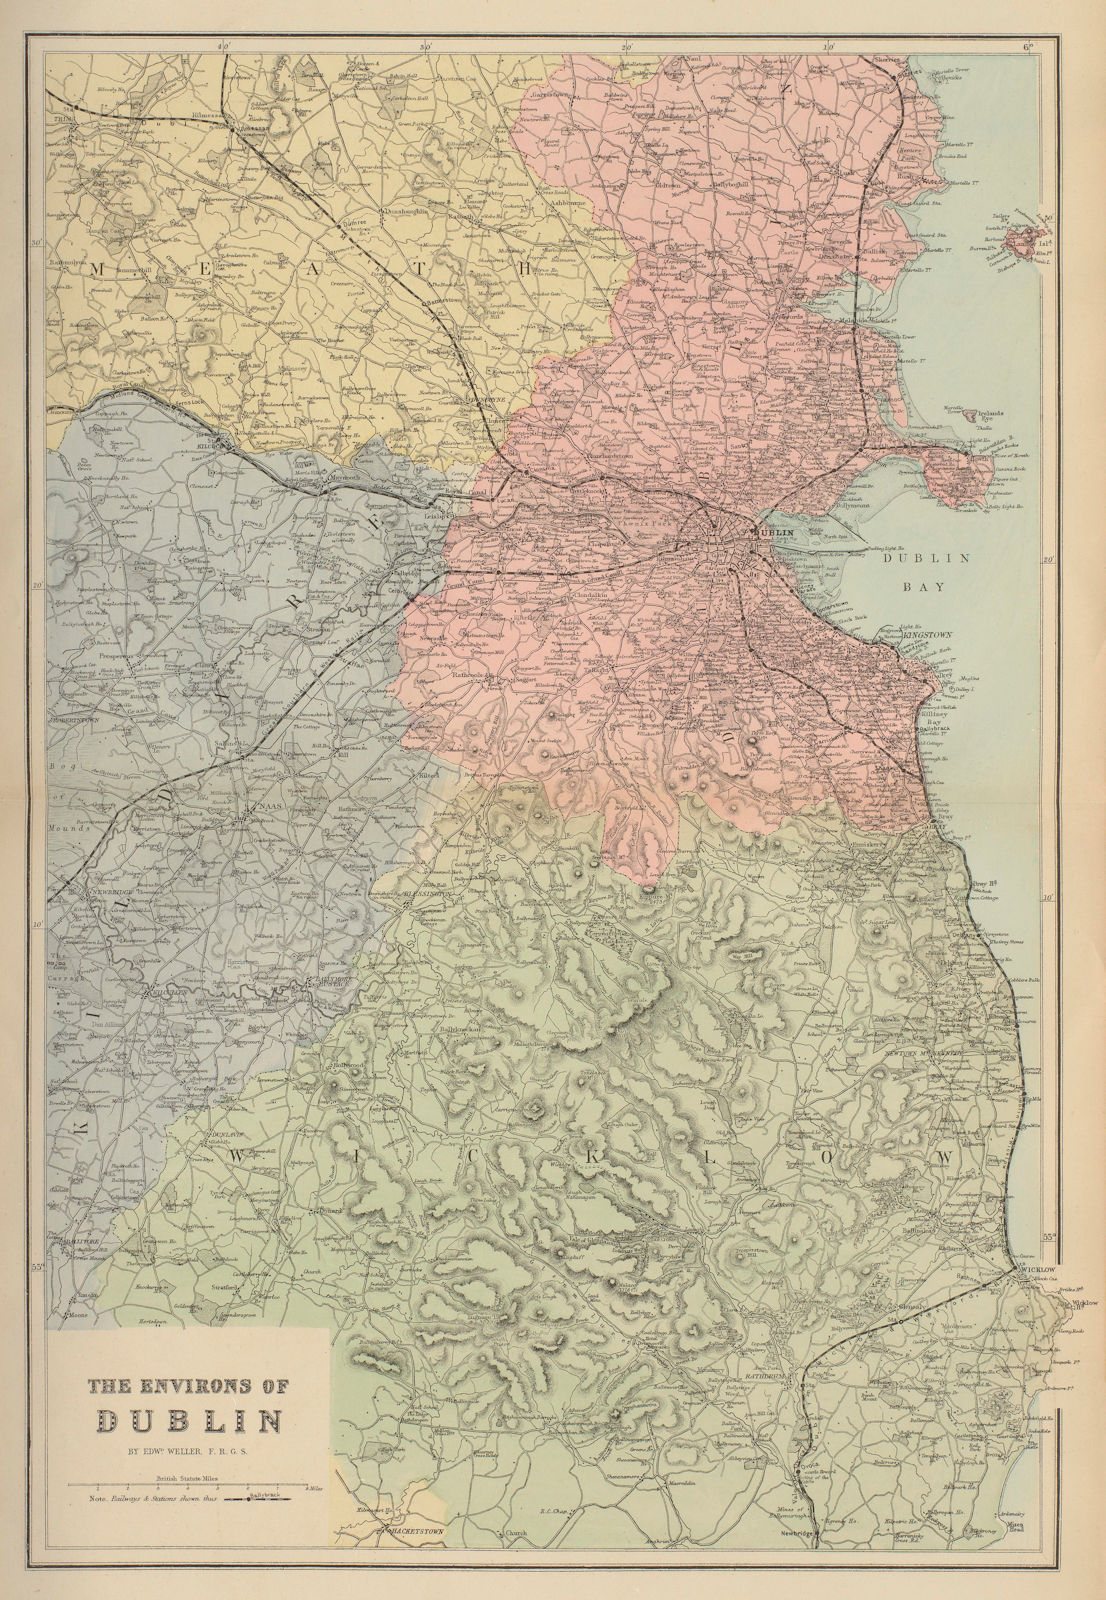 Associate Product DUBLIN & ENVIRONS Meath Kildare Wicklow IRELAND antique map by GW BACON 1883